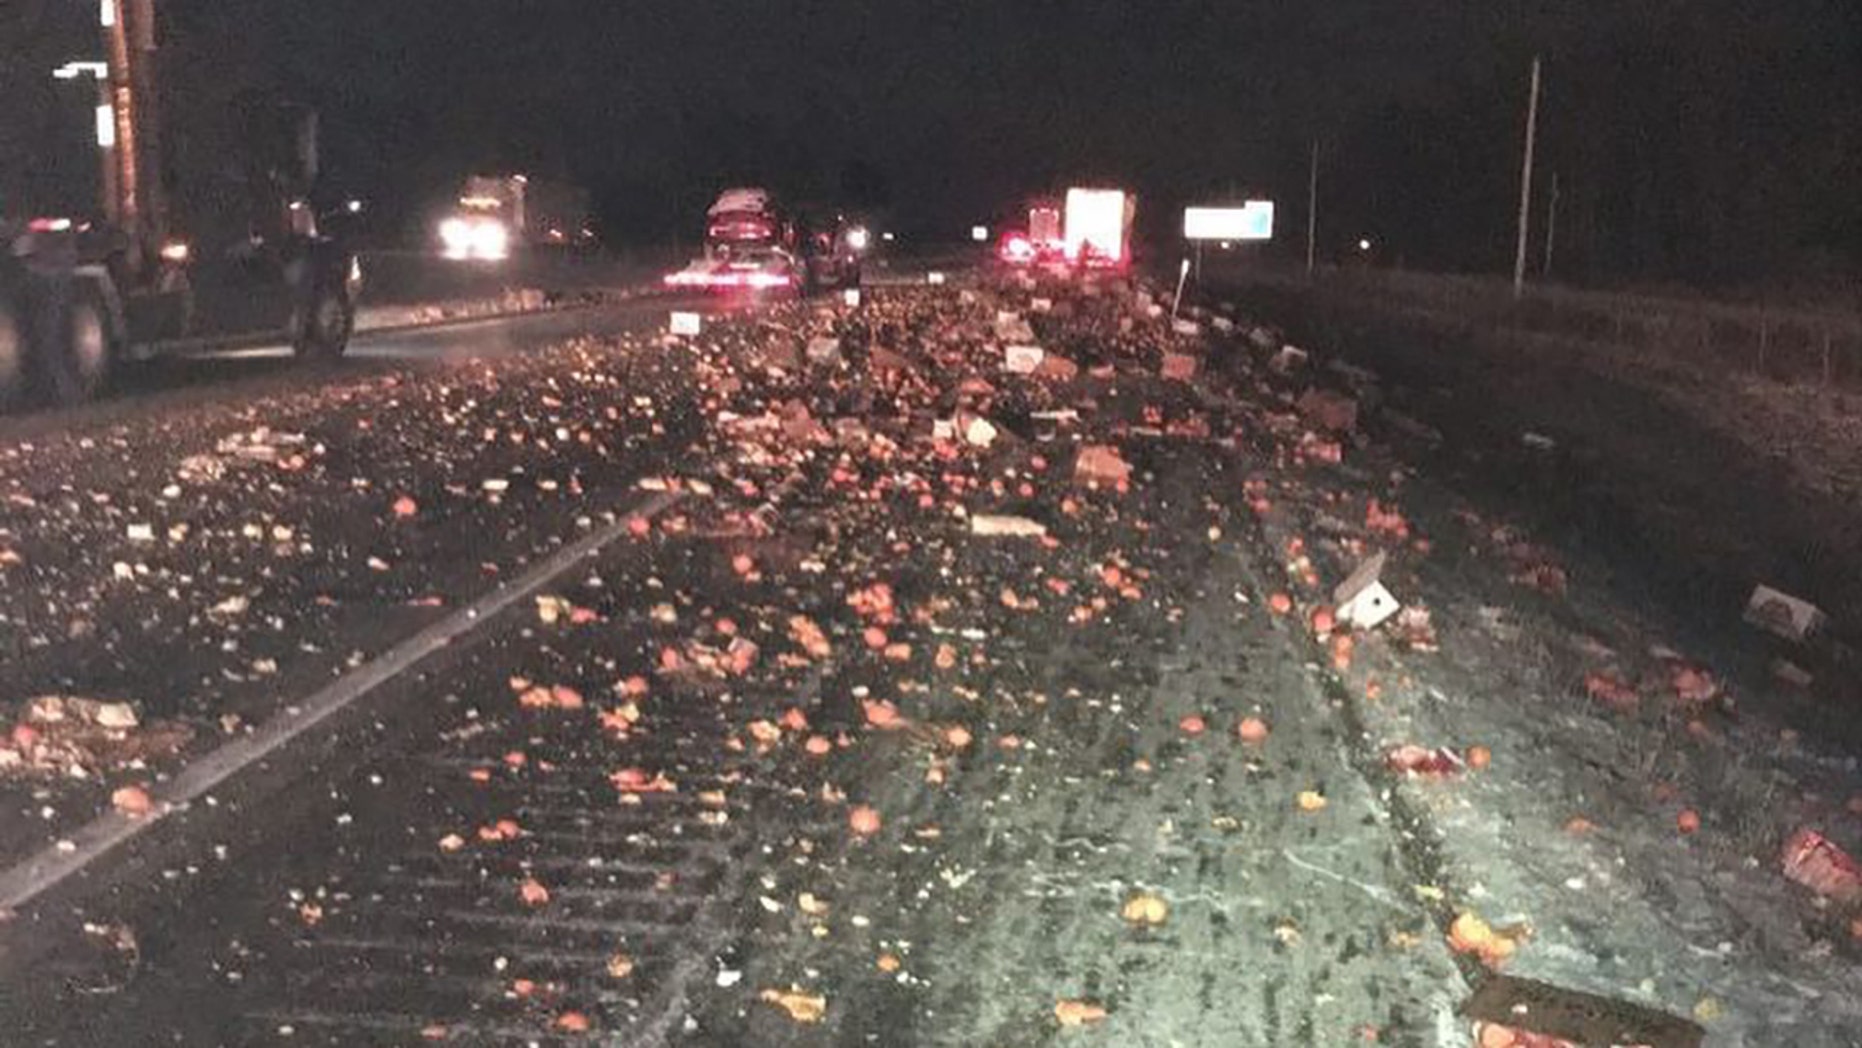 Tractor-trailer crash causes oranges to spill across Indiana highway